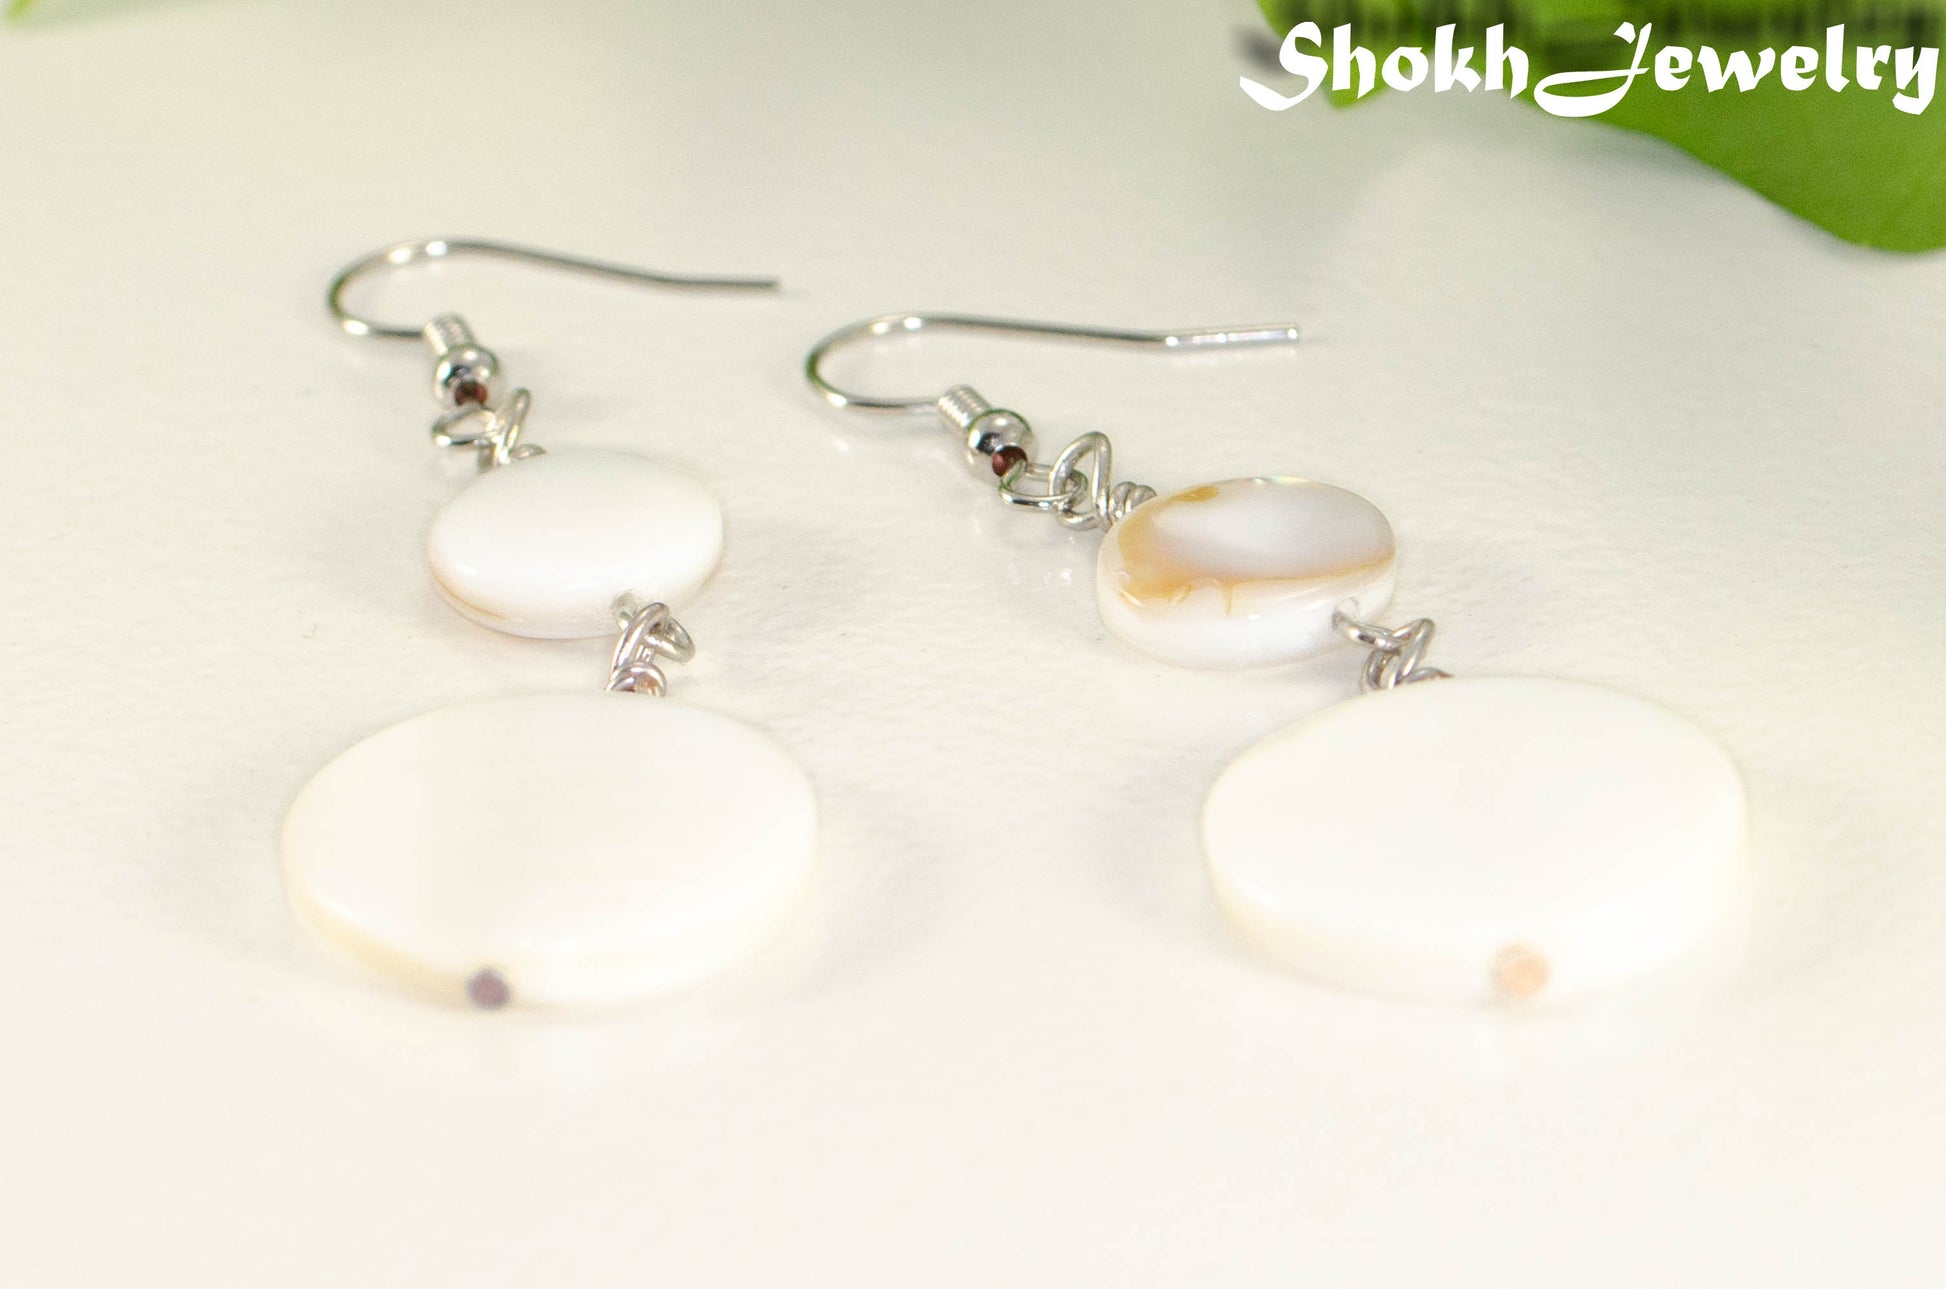 Close up of Statement White Seashell Earrings.